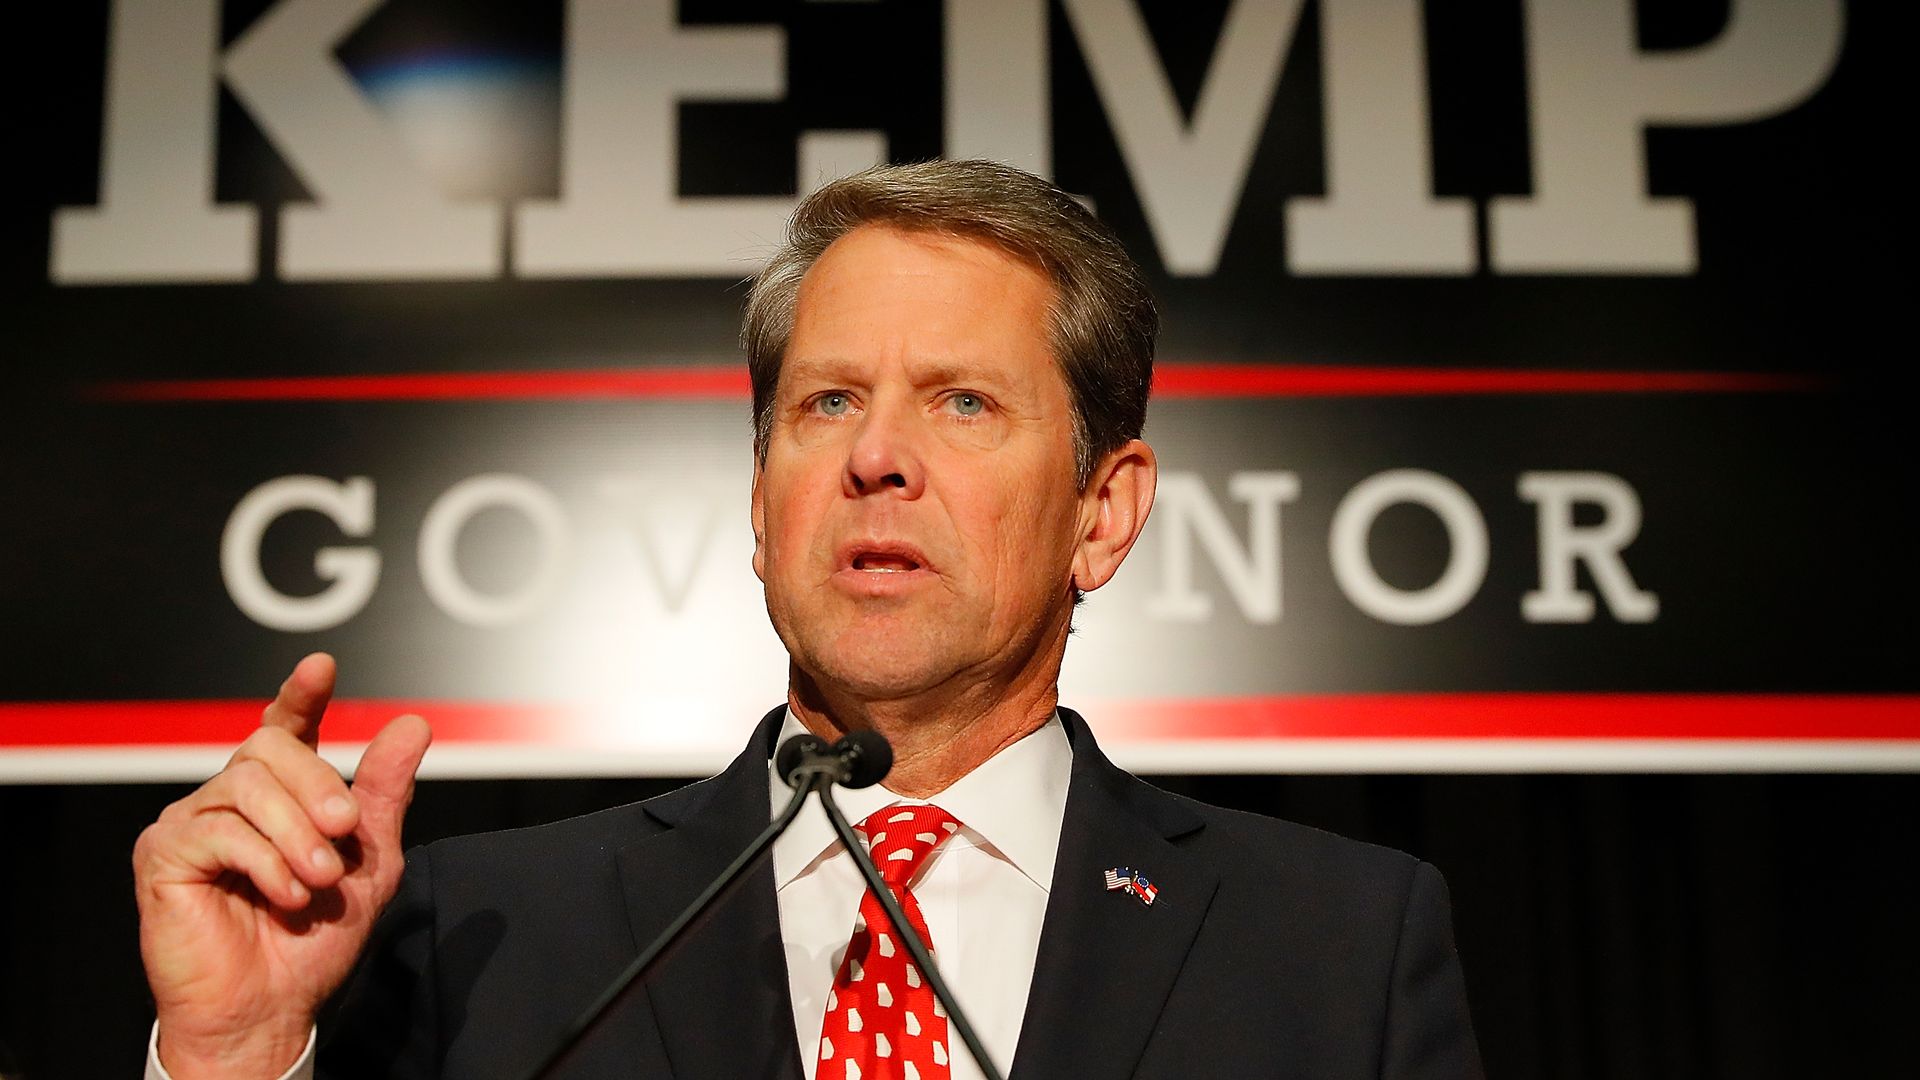 Brian Kemp speaks with a "kemp for governor" sign in the background.